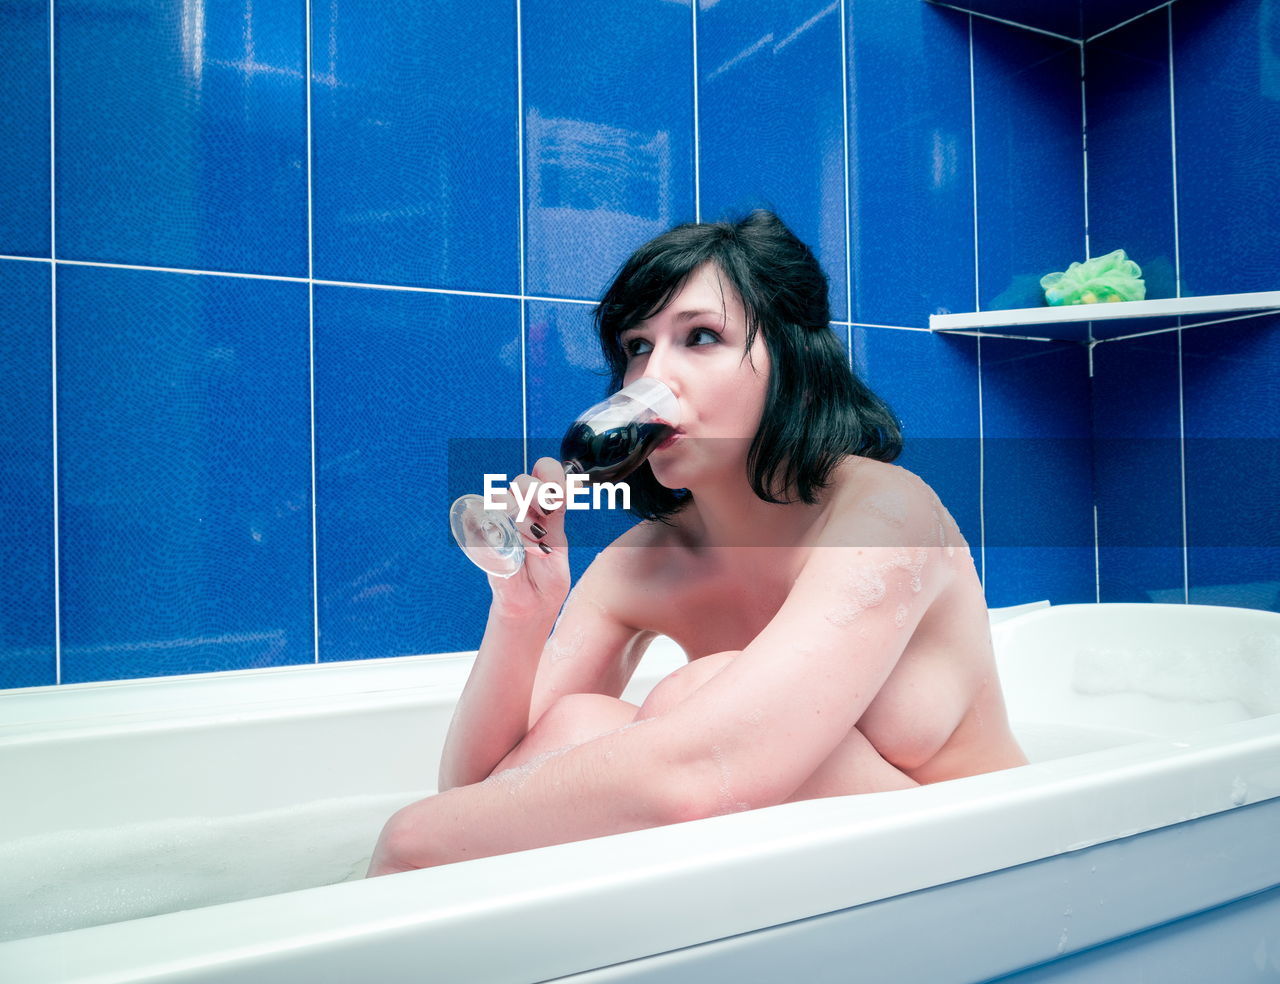 Naked woman drinking wine while sitting in bathtub